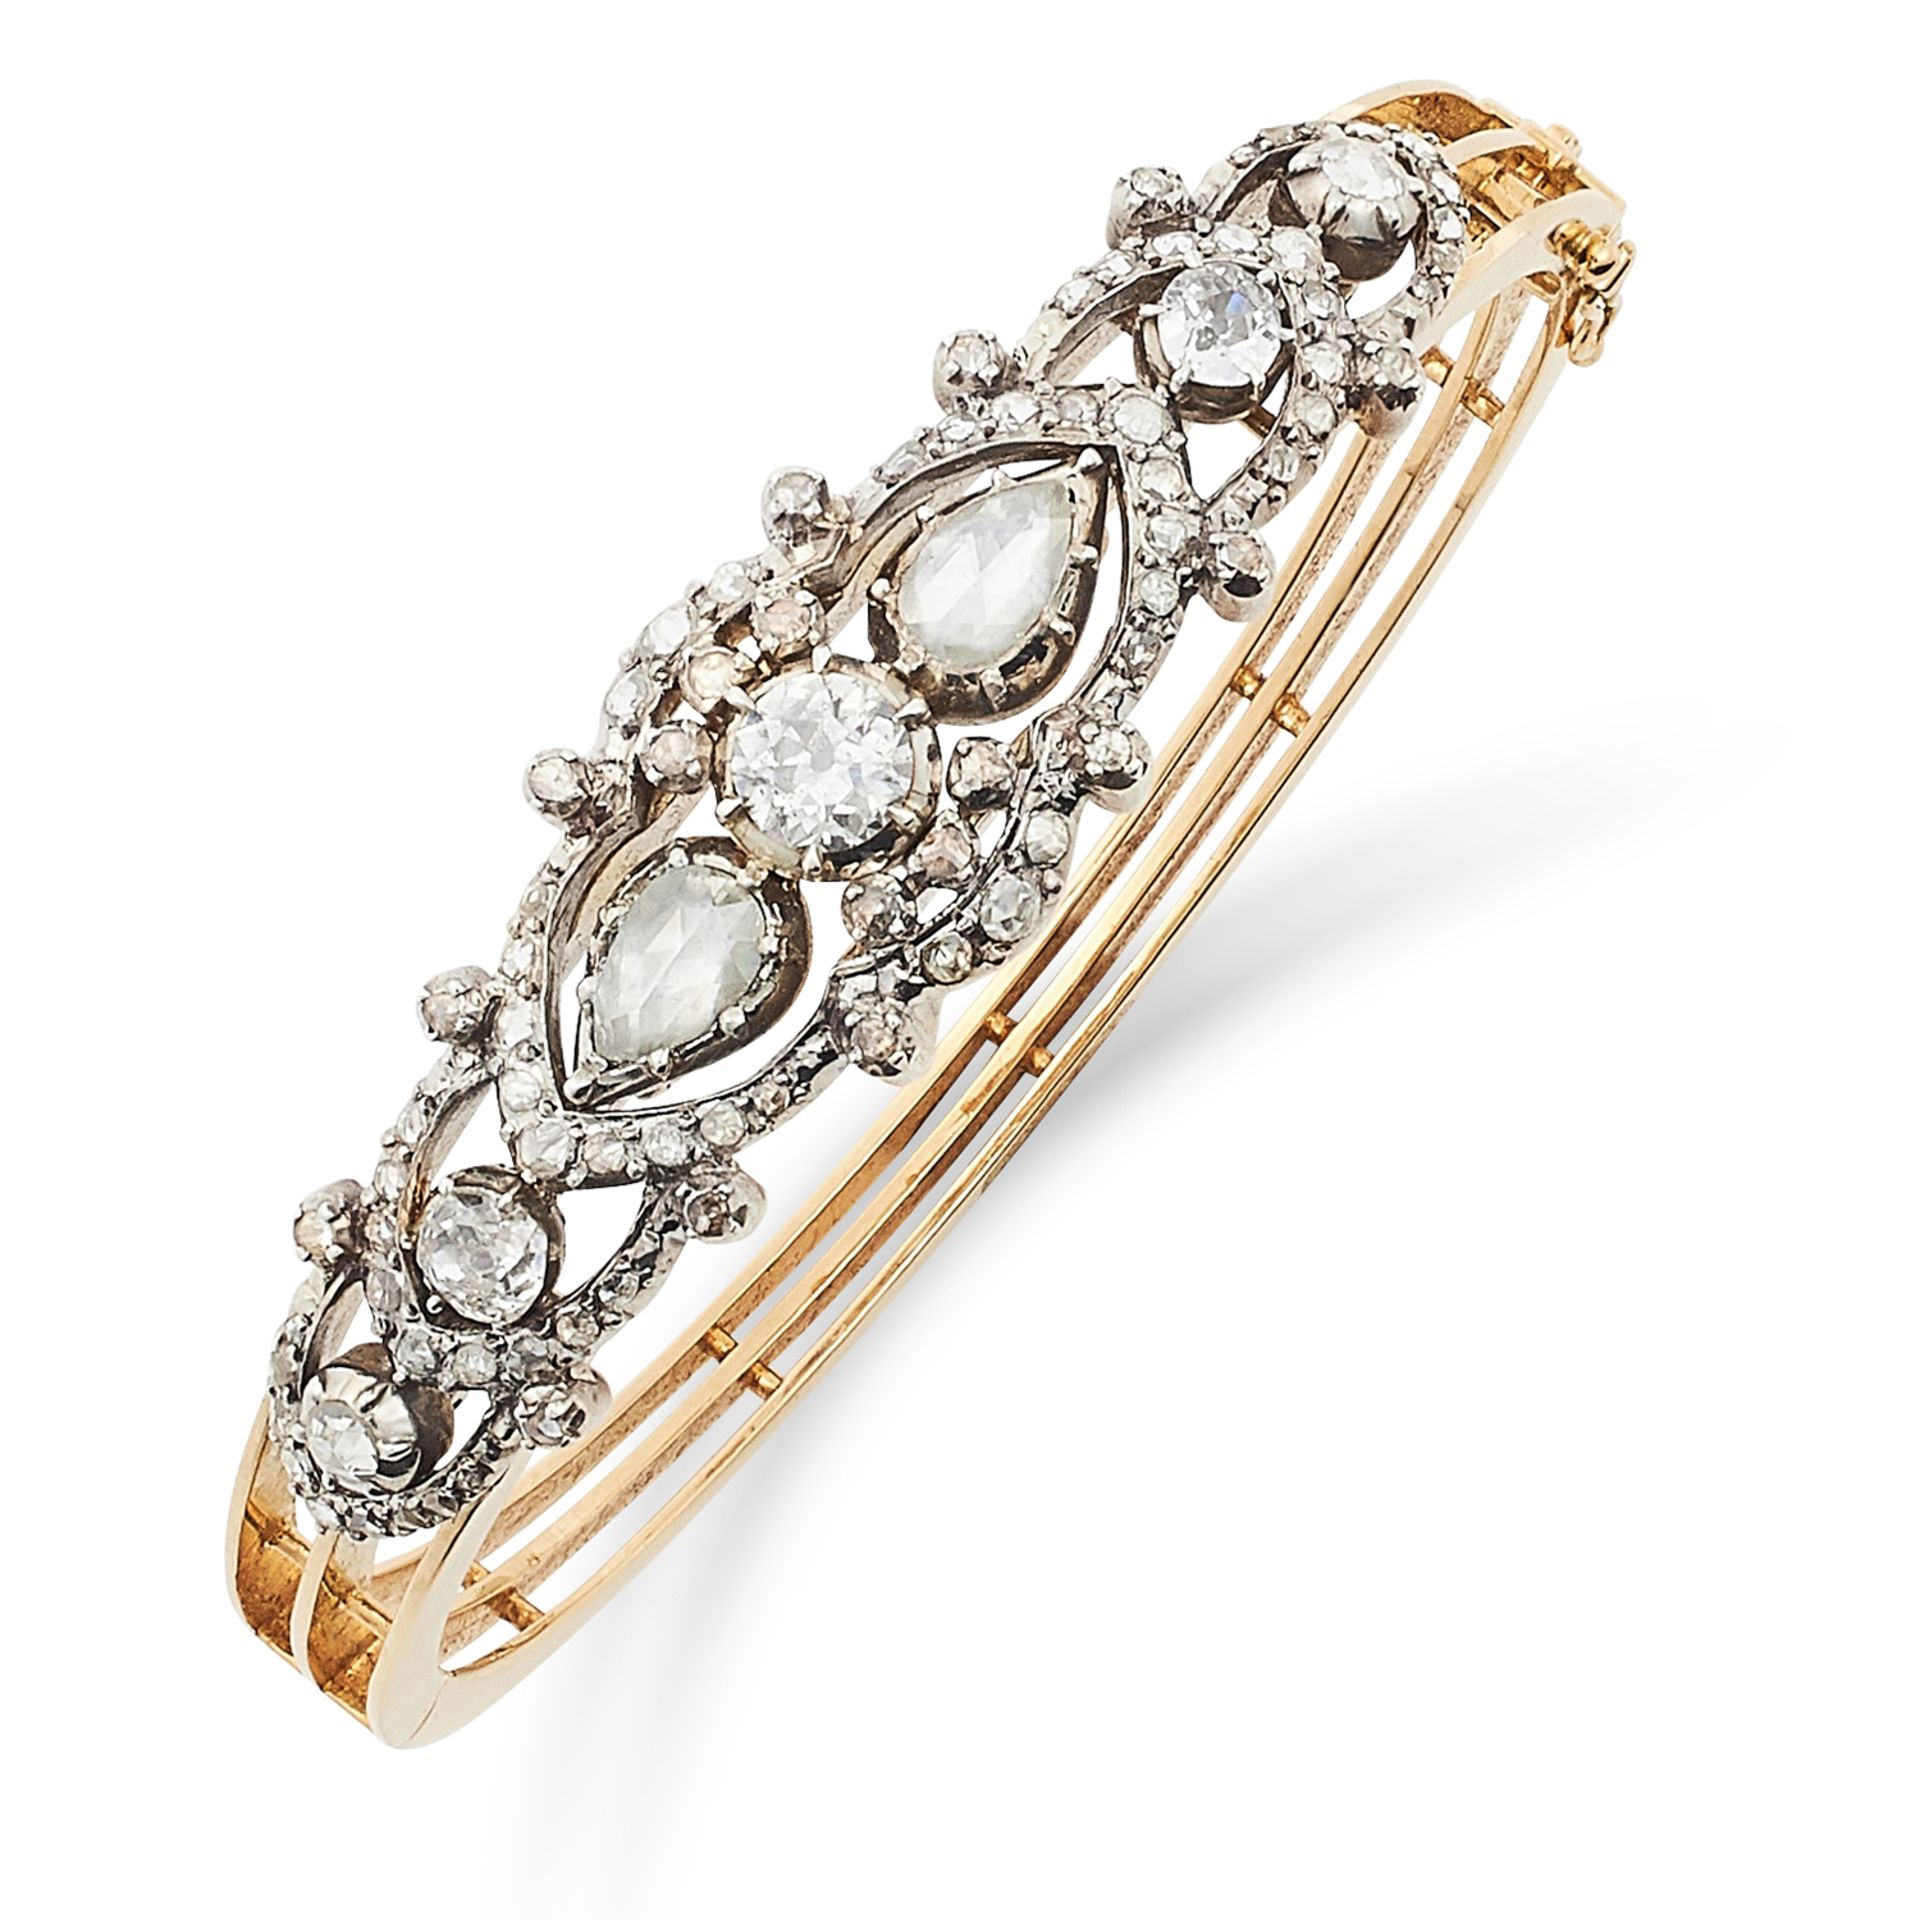 ANTIQUE DIAMOND BANGLE set with old and rose cut diamonds in open framework border, 6cm inner